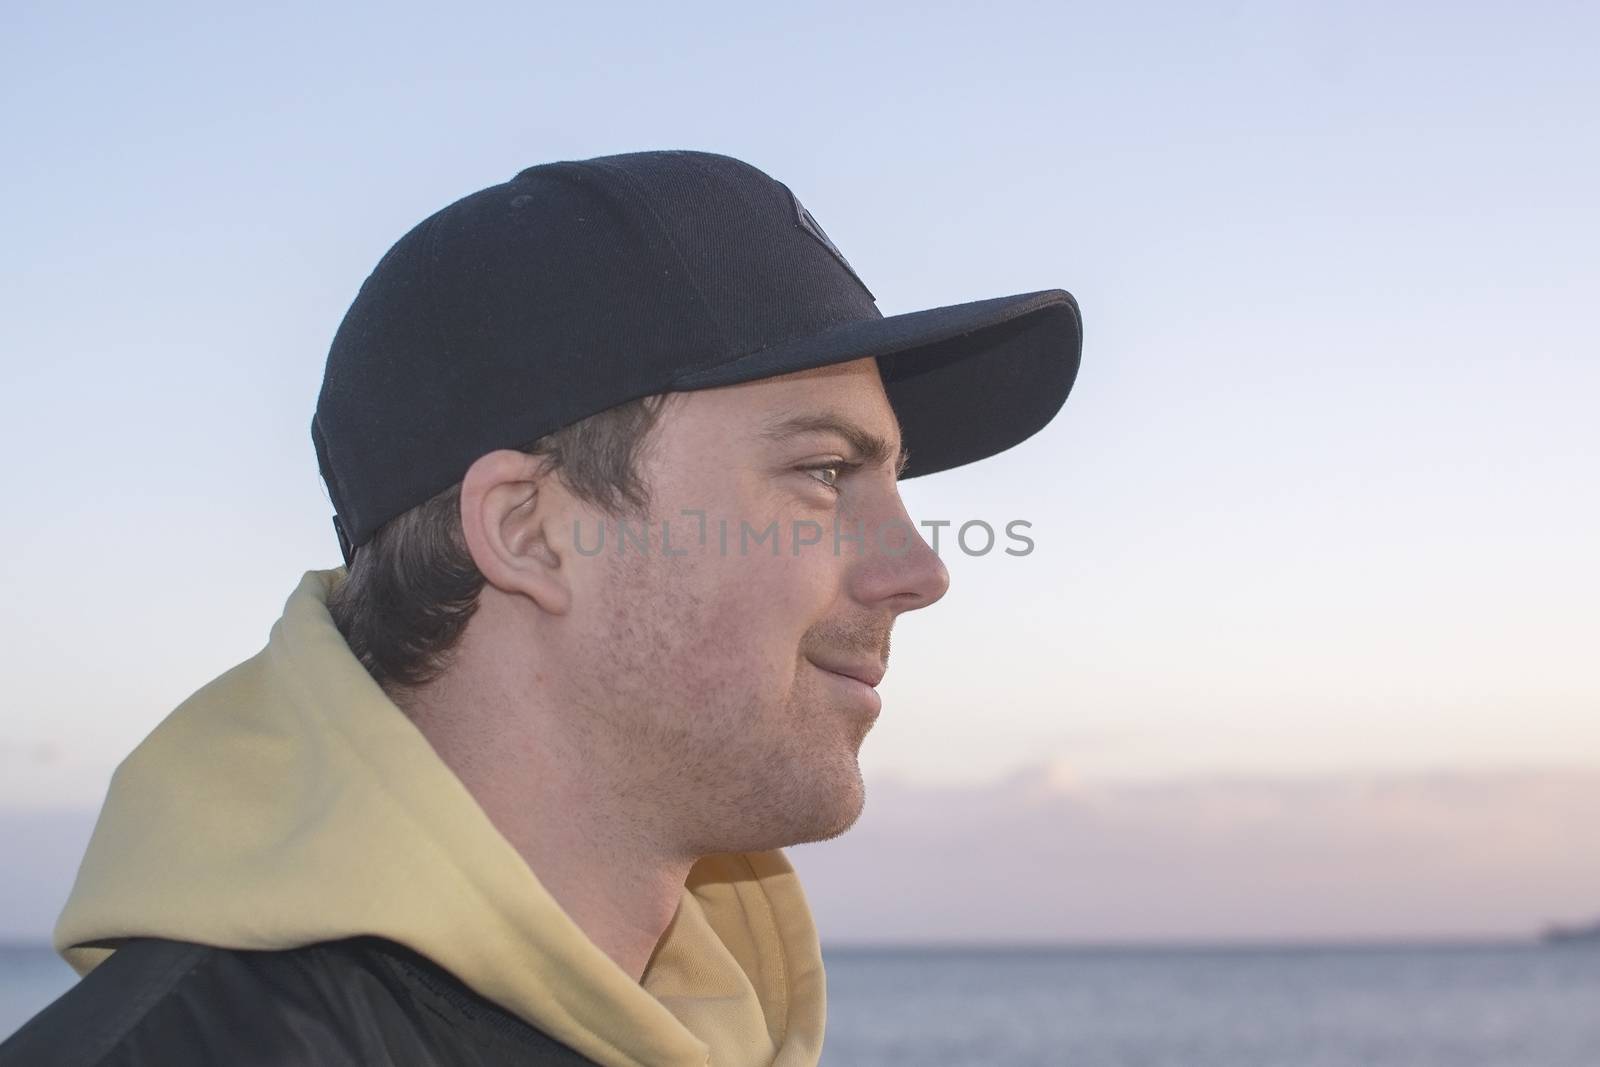 Profile shot of handsome smiling natural and casual looking male by ArtesiaWells